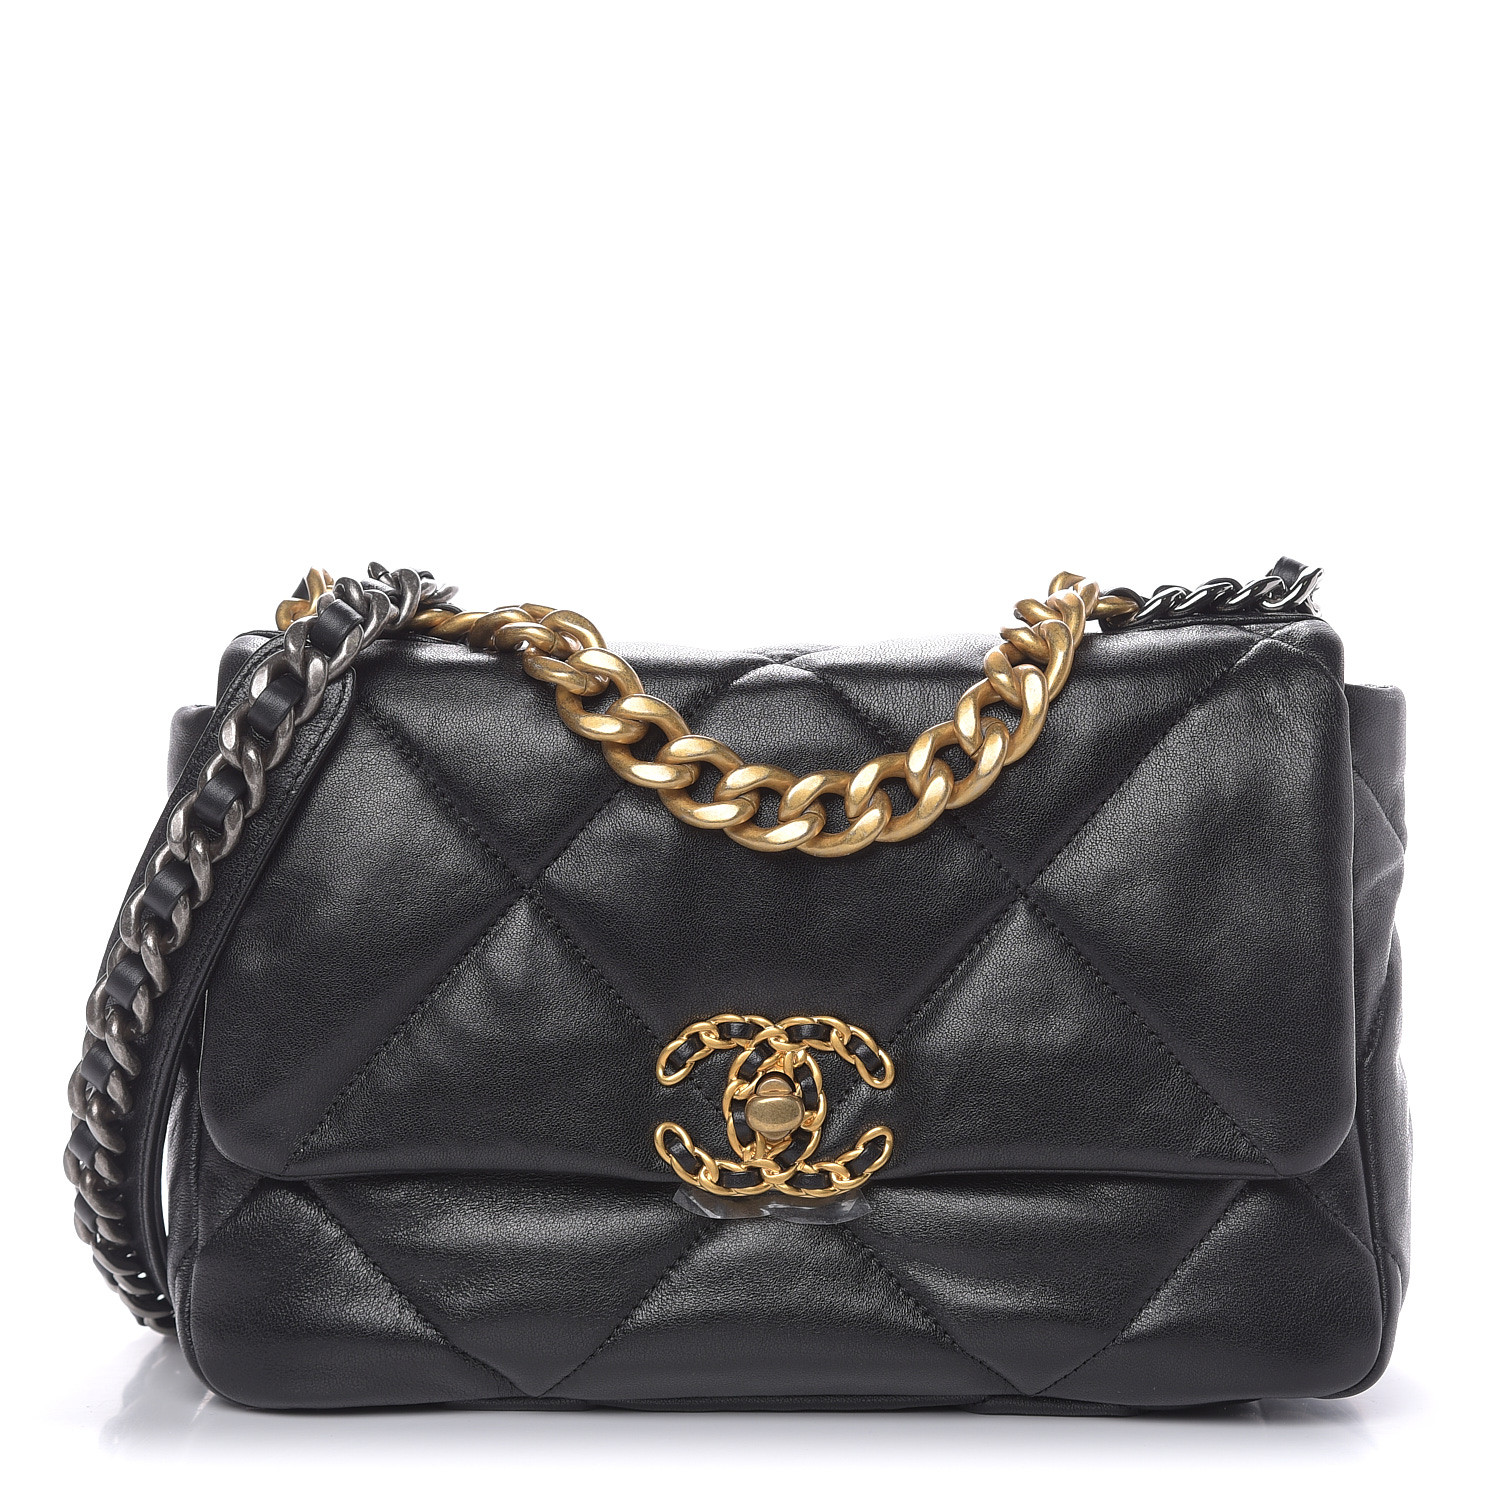 CHANEL Lambskin Quilted Medium Chanel 19 Flap Black 483541